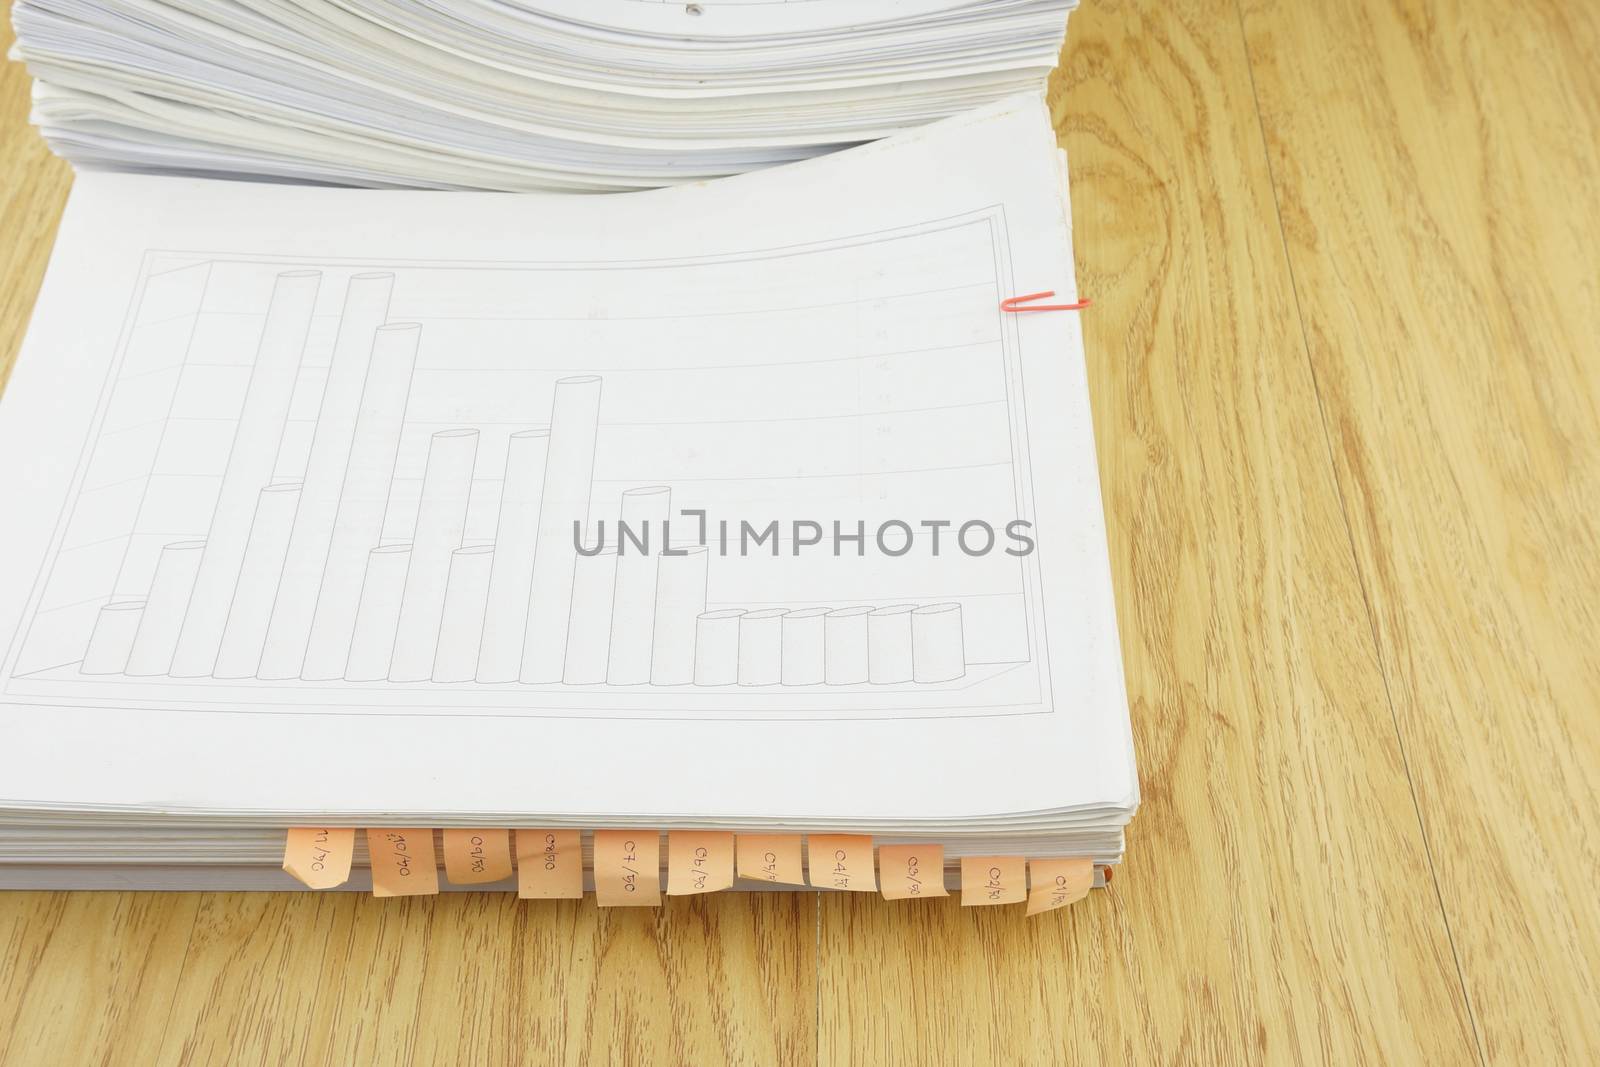 Index document include sales, graph and receipt place on wood background.